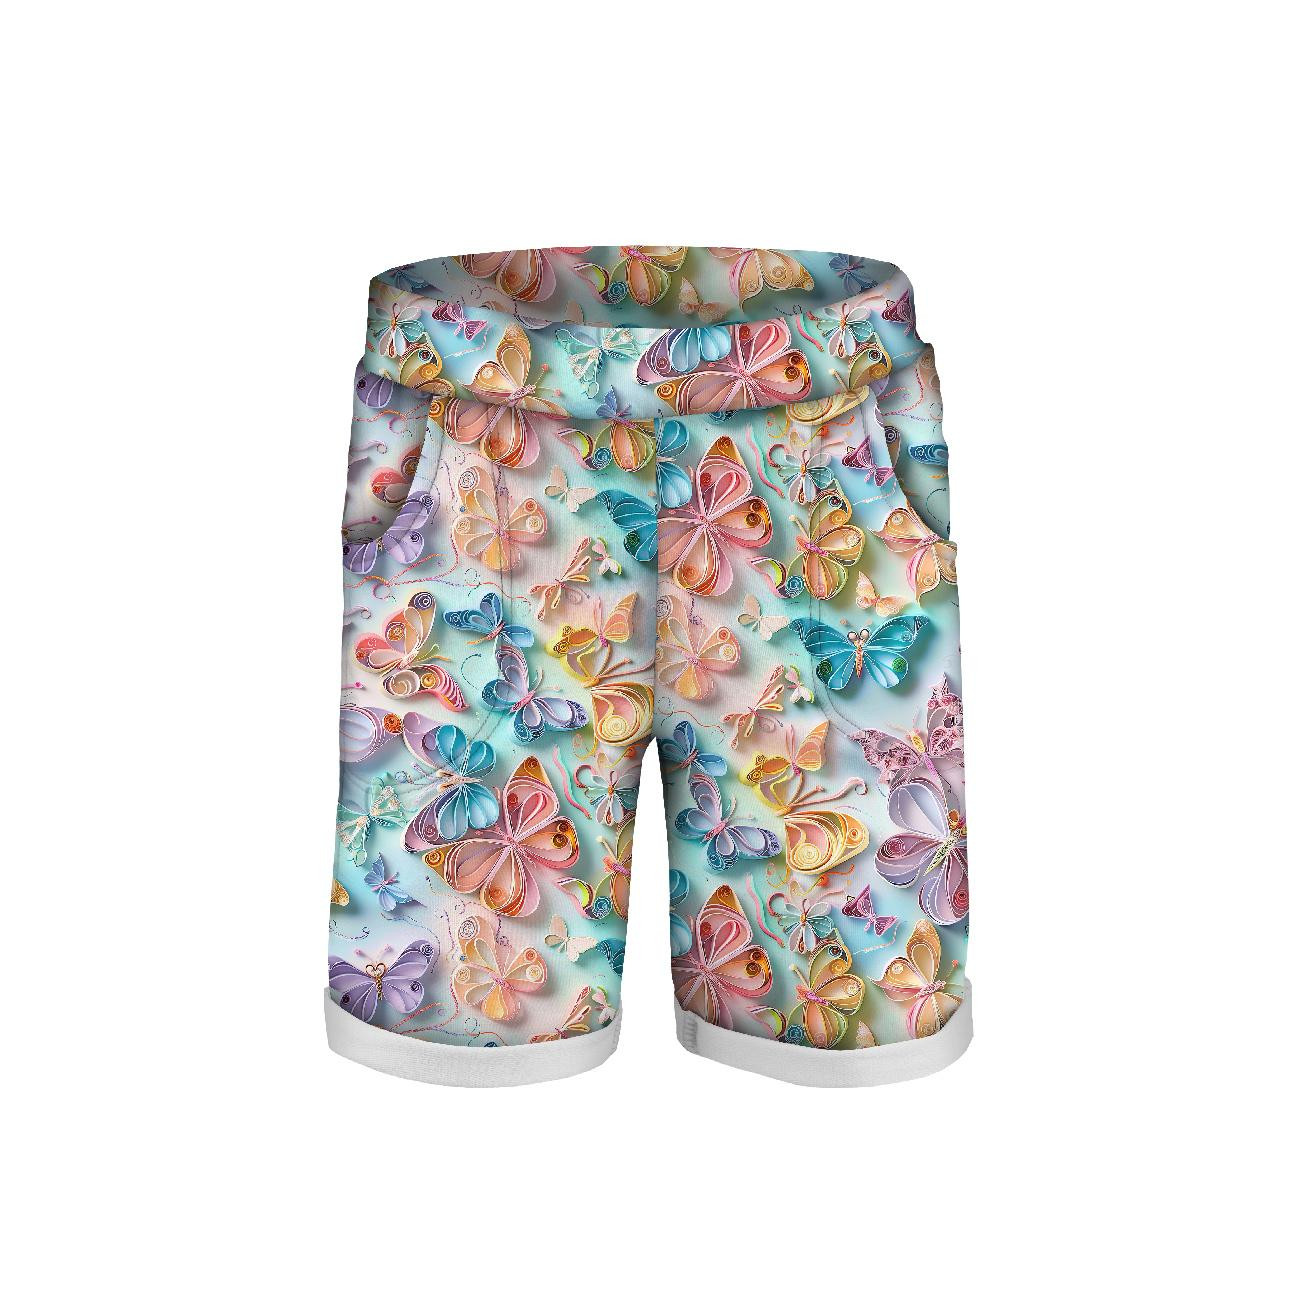 KID`S SHORTS (RIO) - PAPER BUTTERFLIES - looped knit fabric 